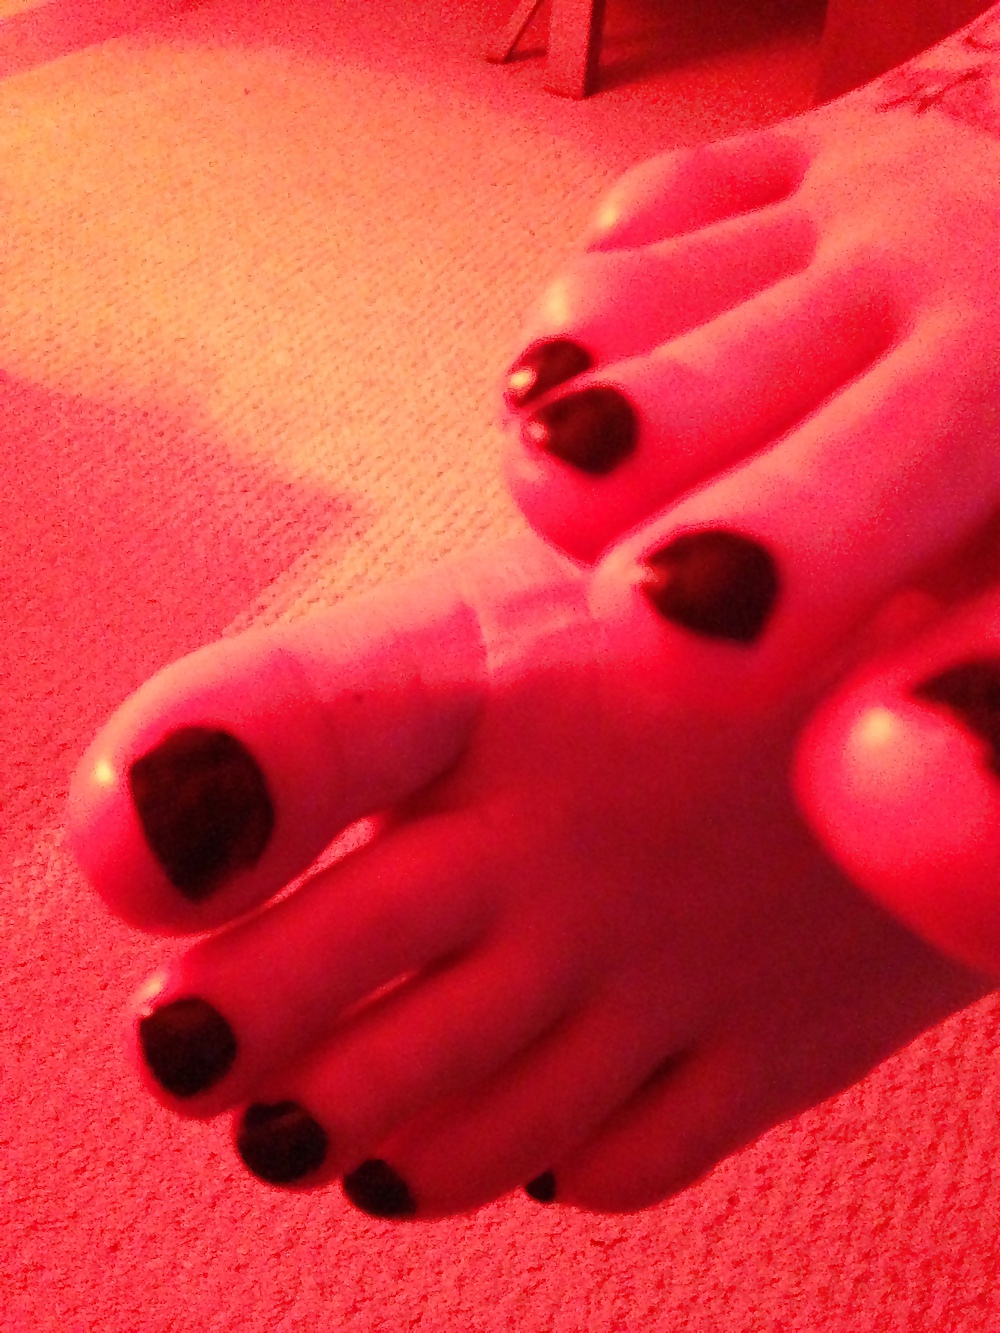 New foot pics for fans of my gf,s feet #16776304